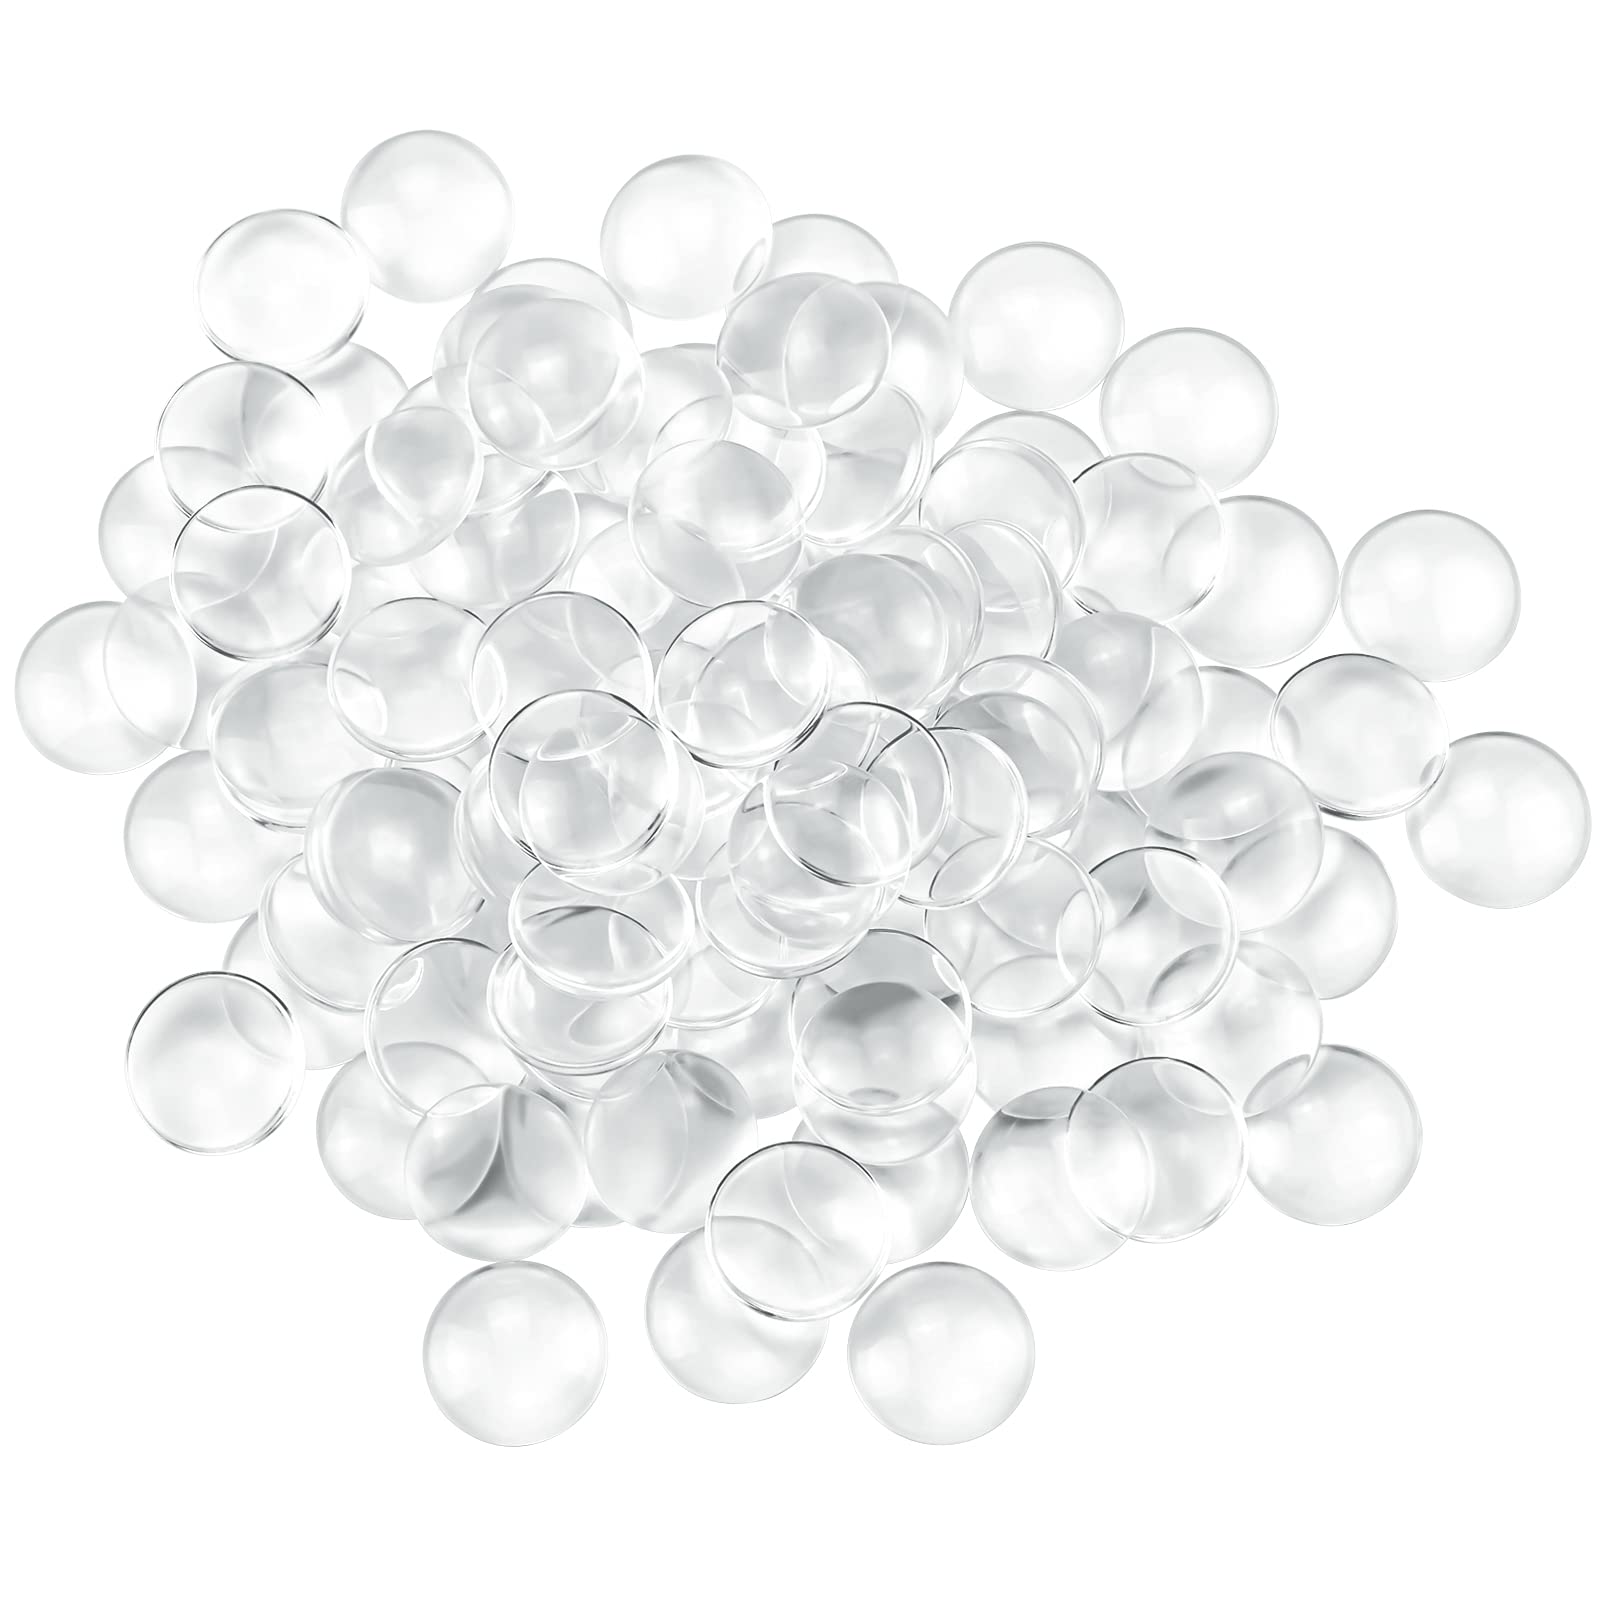 Acmer 100 Pieces Transparent Glass cabochons Clear Glass Dome